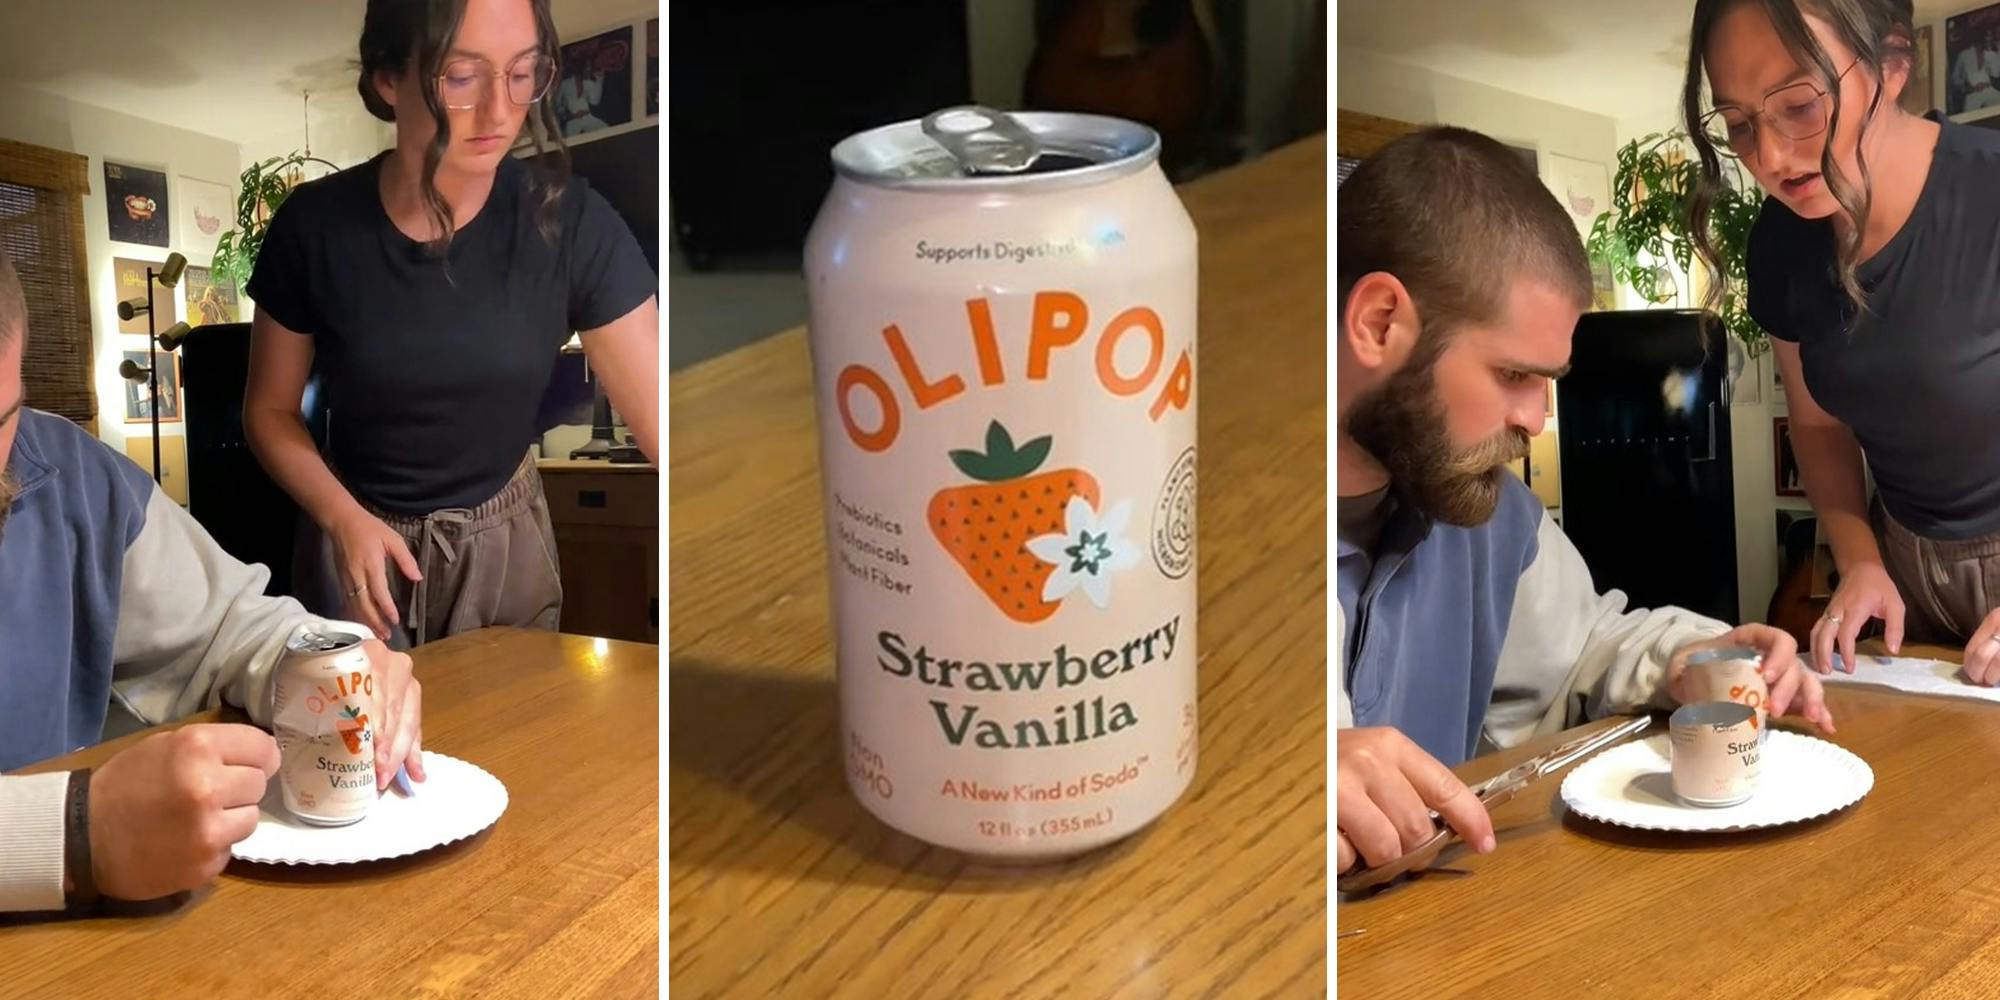 Customer finds something unusual in Olipop can 